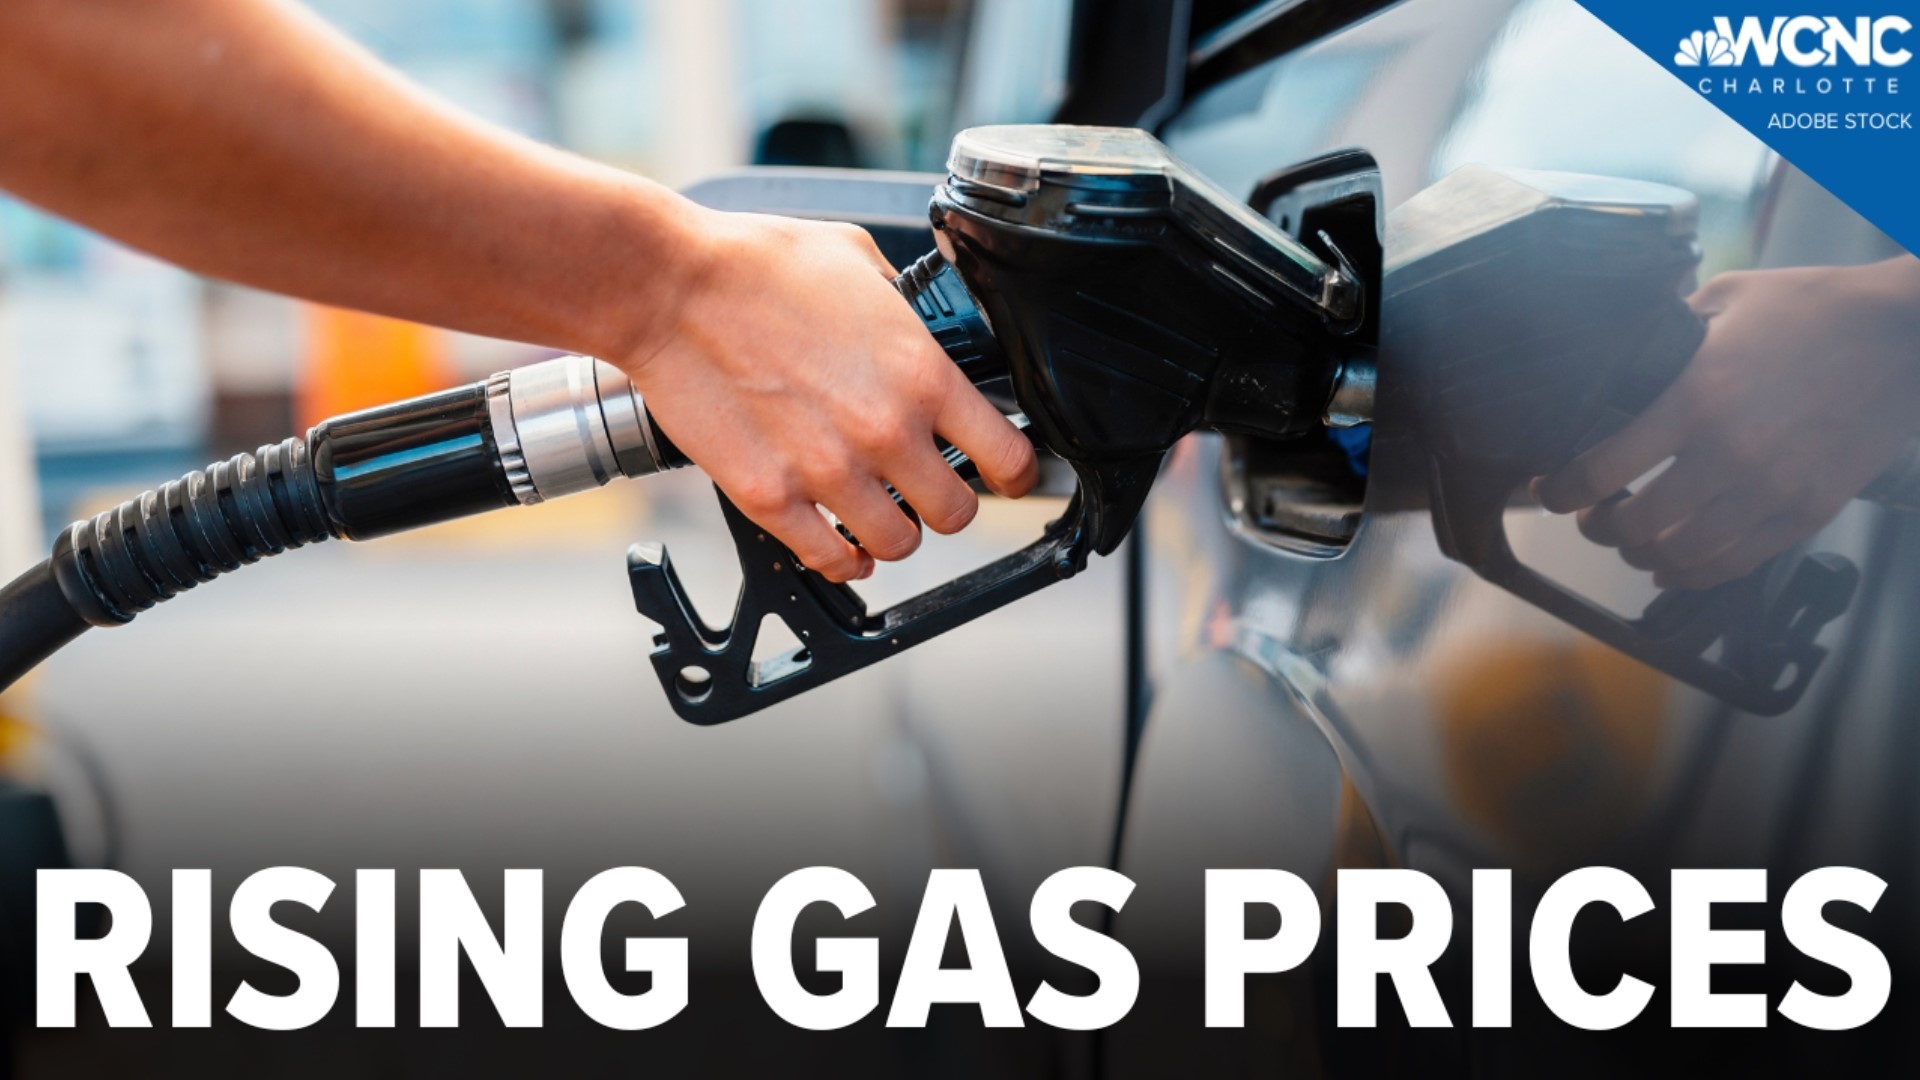 Gas prices across the Carolinas are on the rise.